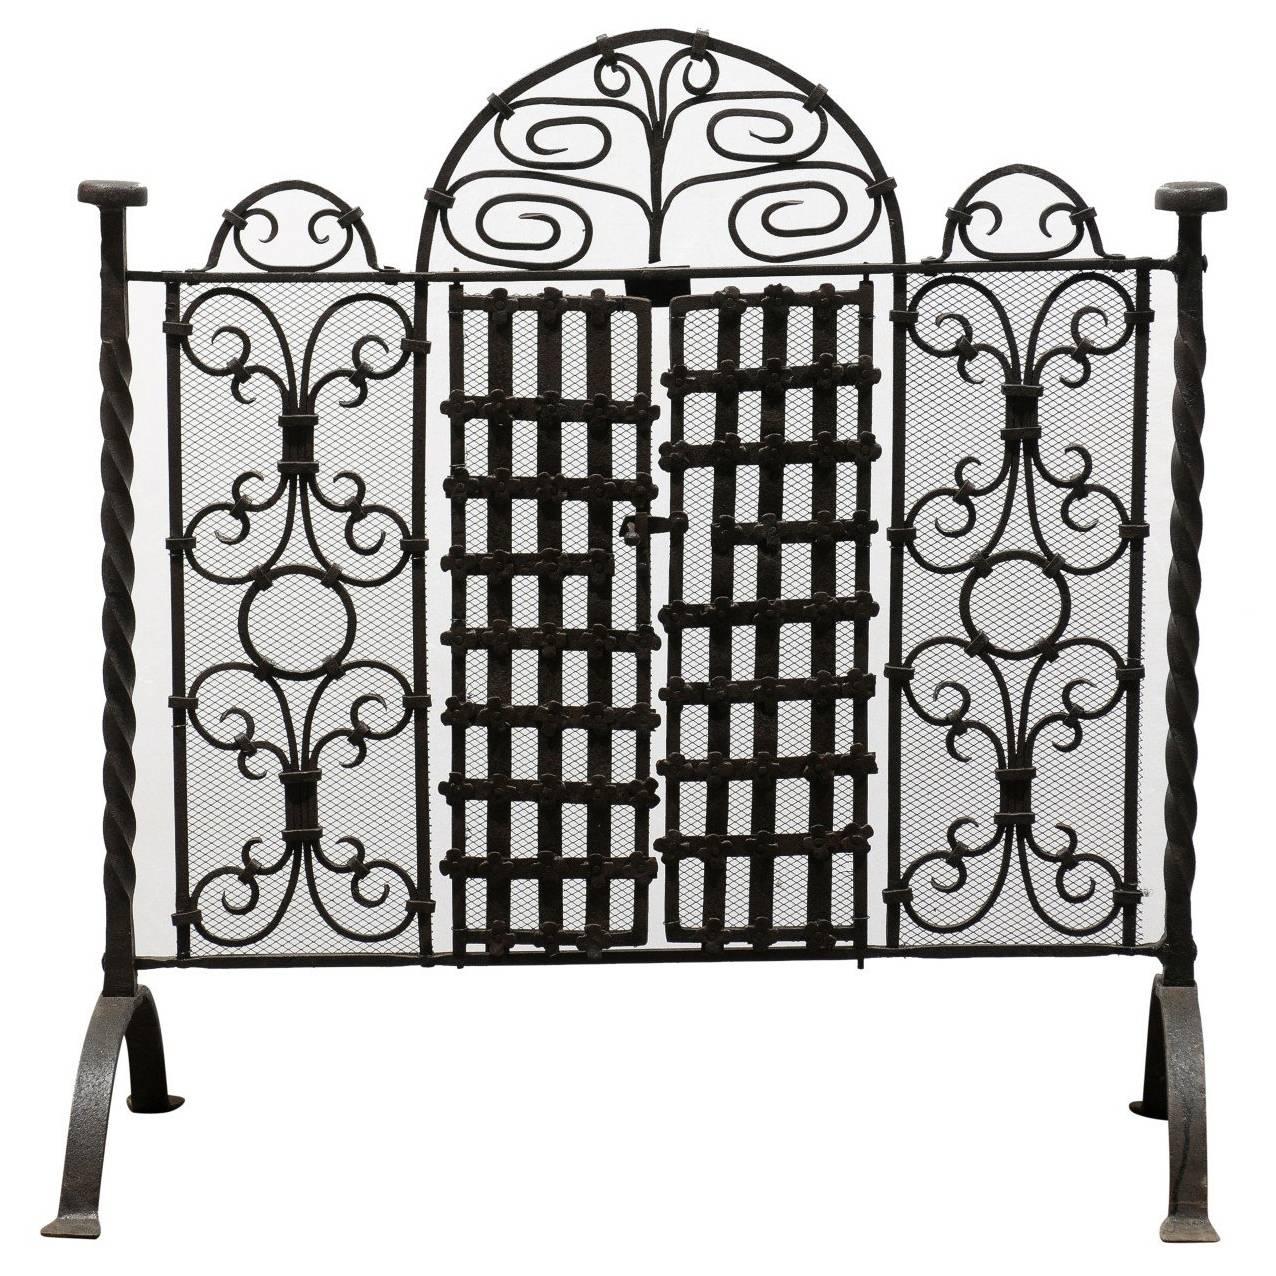 French 19th Century Wrought-Iron Firescreen with Operational Doors and Arch